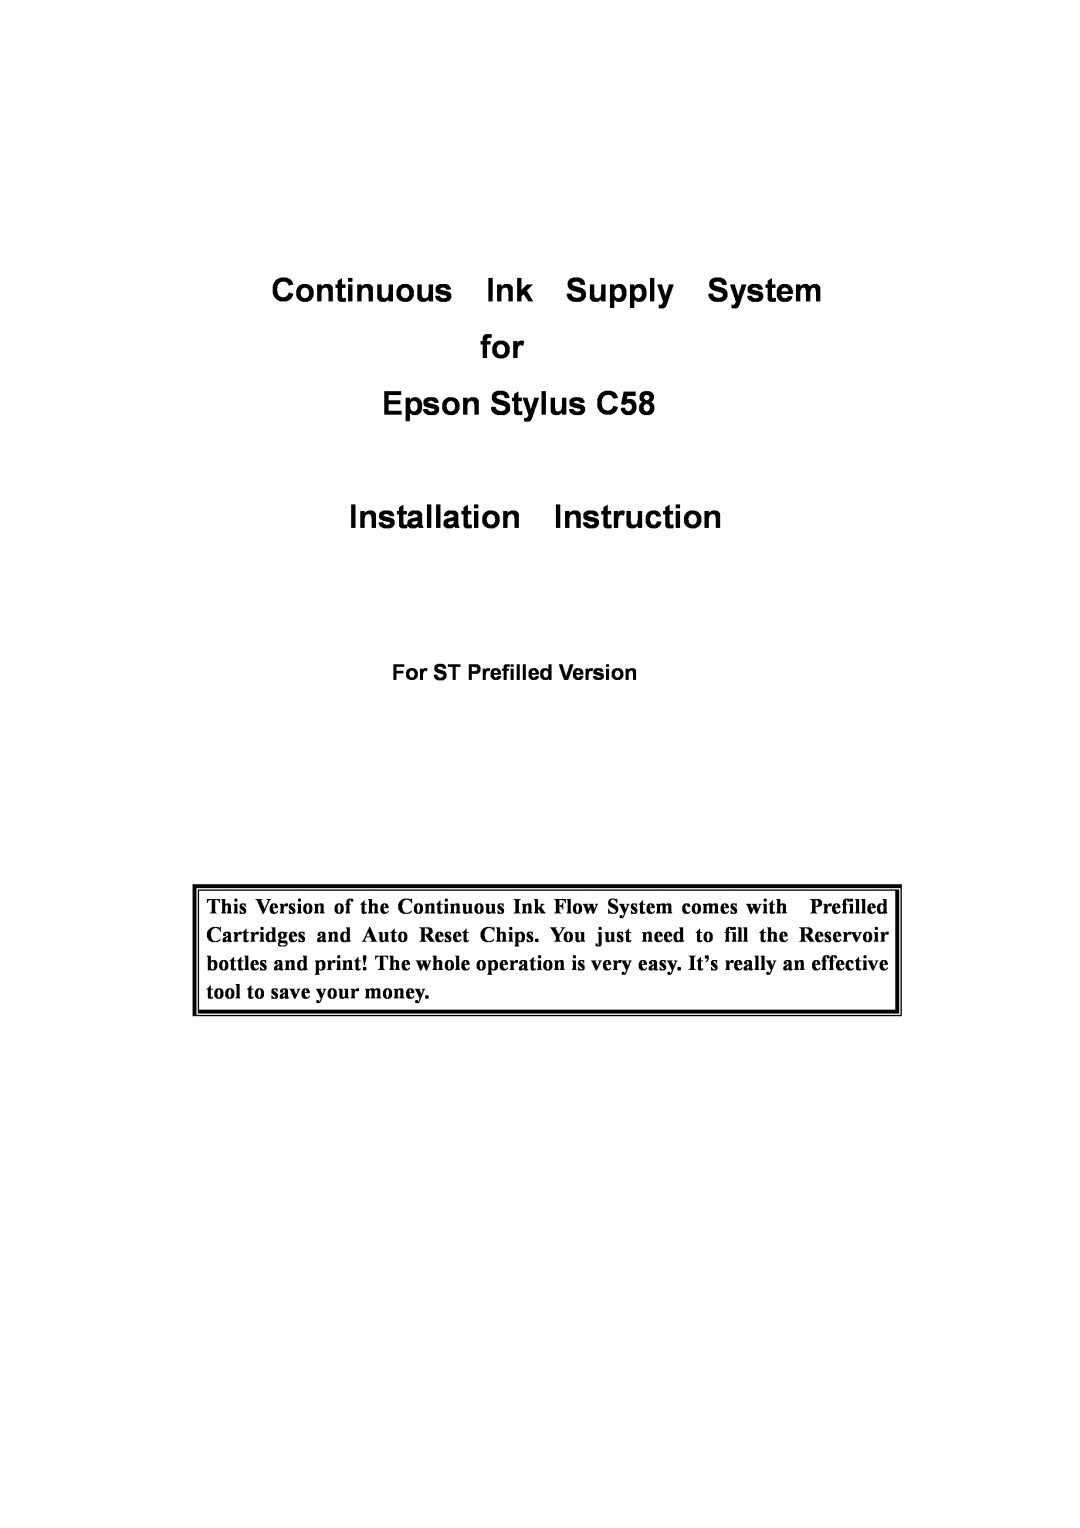 Epson c58 manual For ST Prefilled Version, Continuous Ink Supply System for Epson Stylus C58, Installation Instruction 